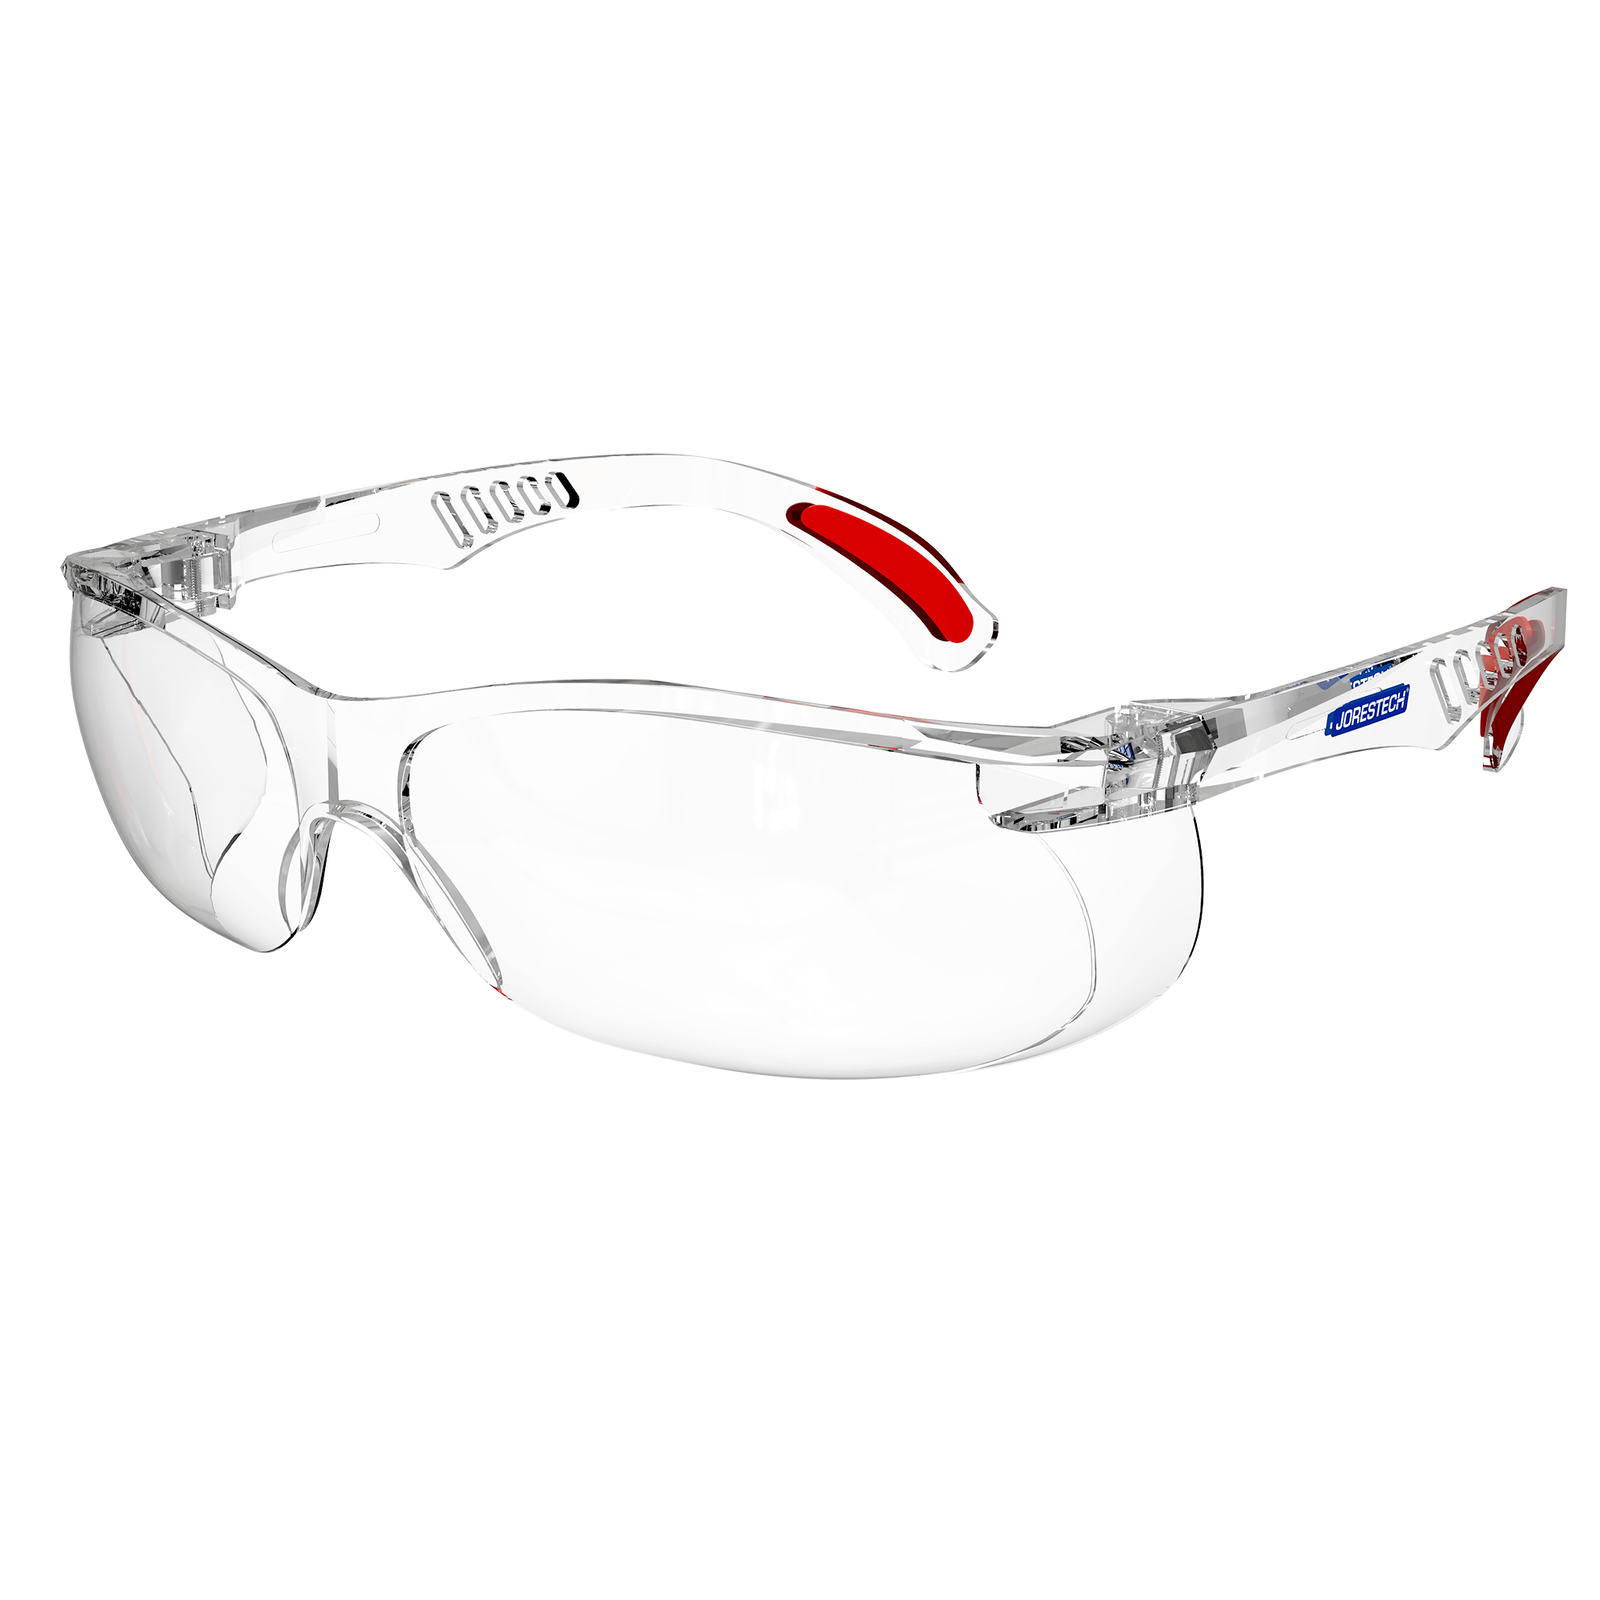 Diagonal view of the clear JORESTECH panoramic safety glass with side shields for high impact protection.  Temples of this ANSI compliant glasses have details in red. 